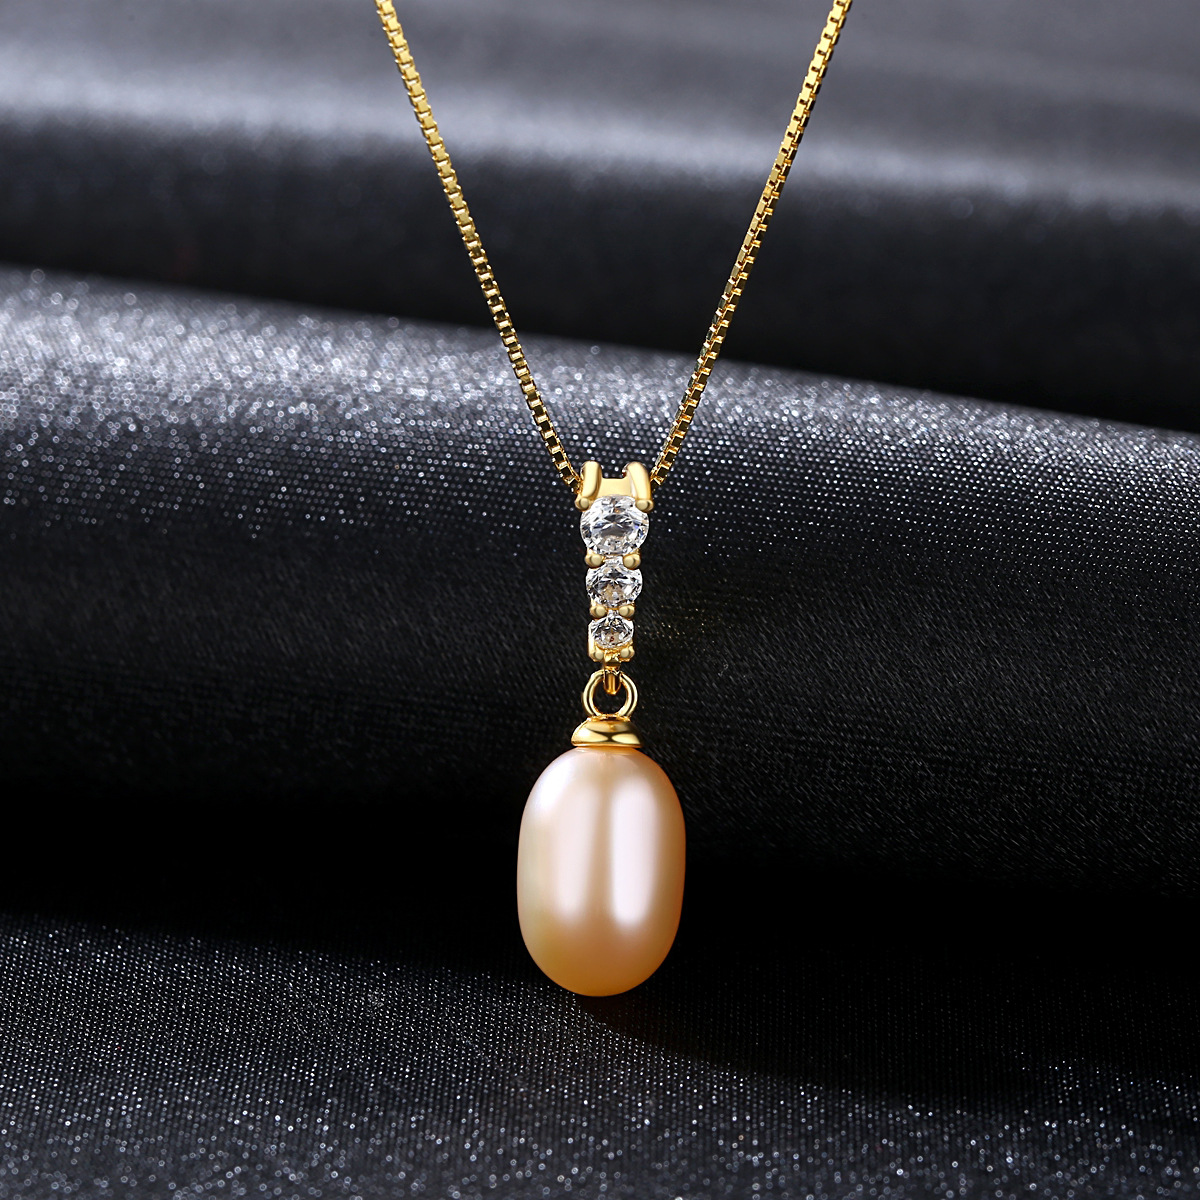 Freshwater Pearl Pendant With Cz Sterling Silver Necklace